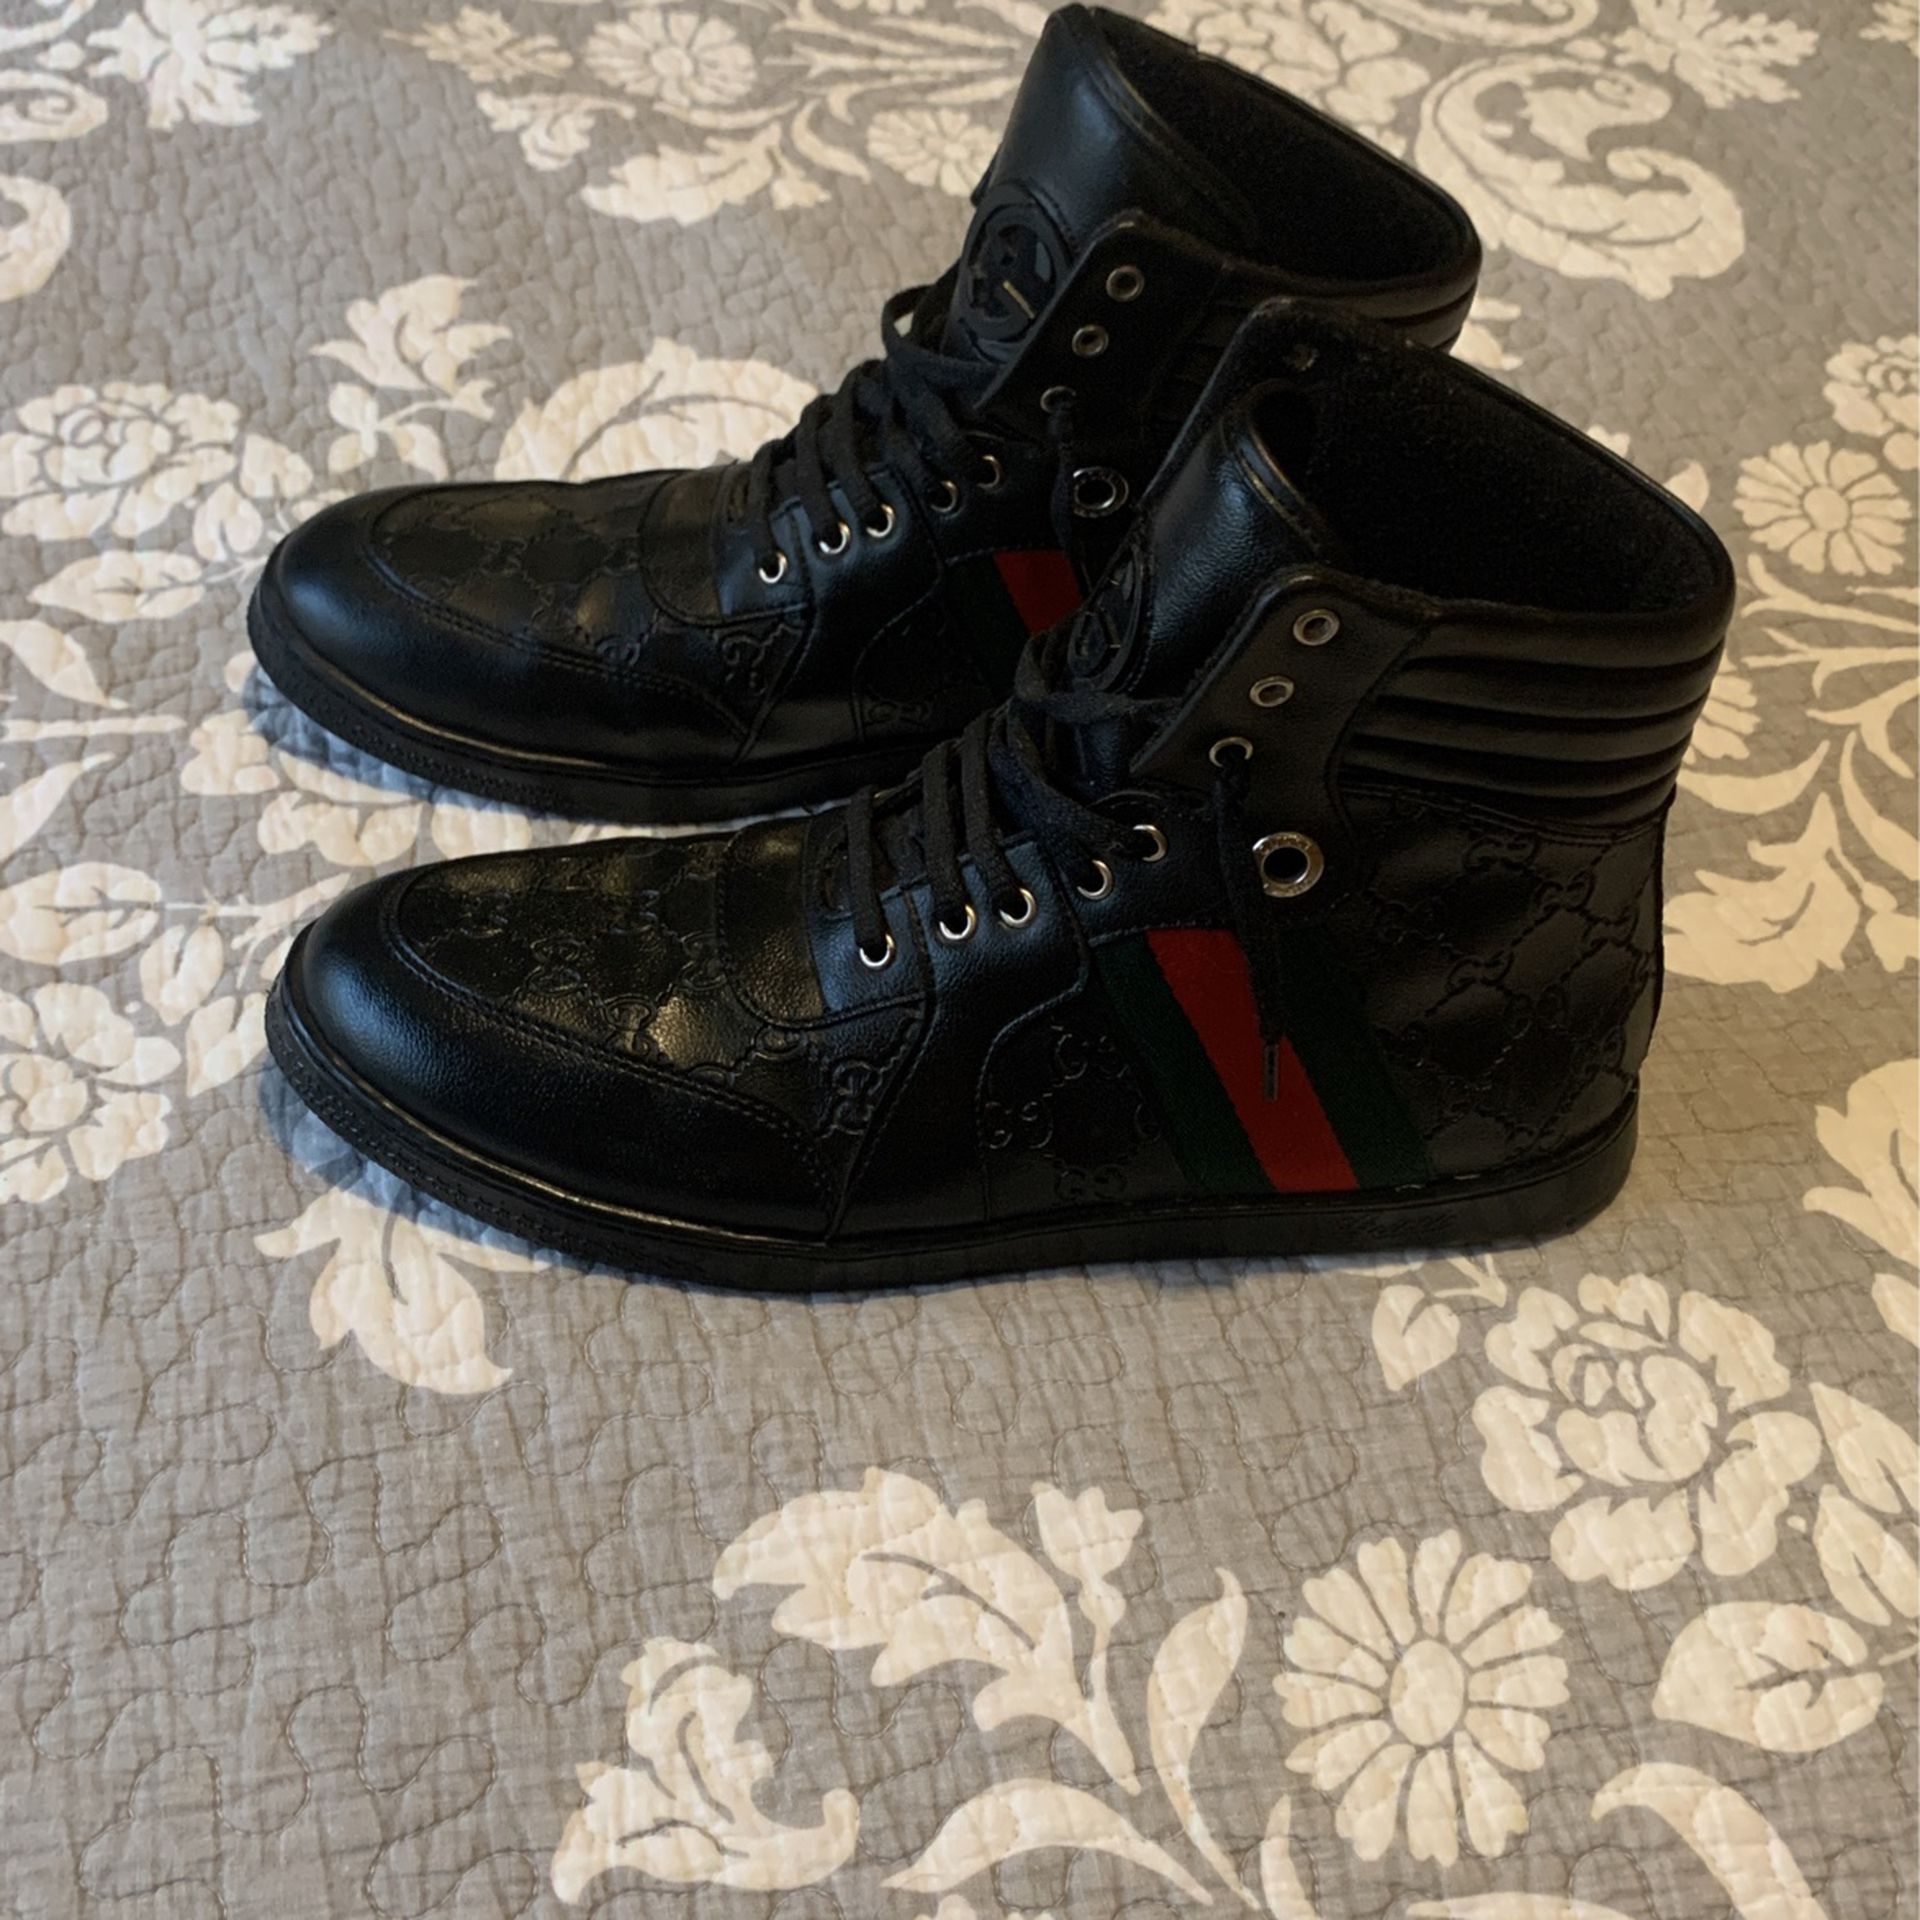 Gucci High Too Leather Web Size 10